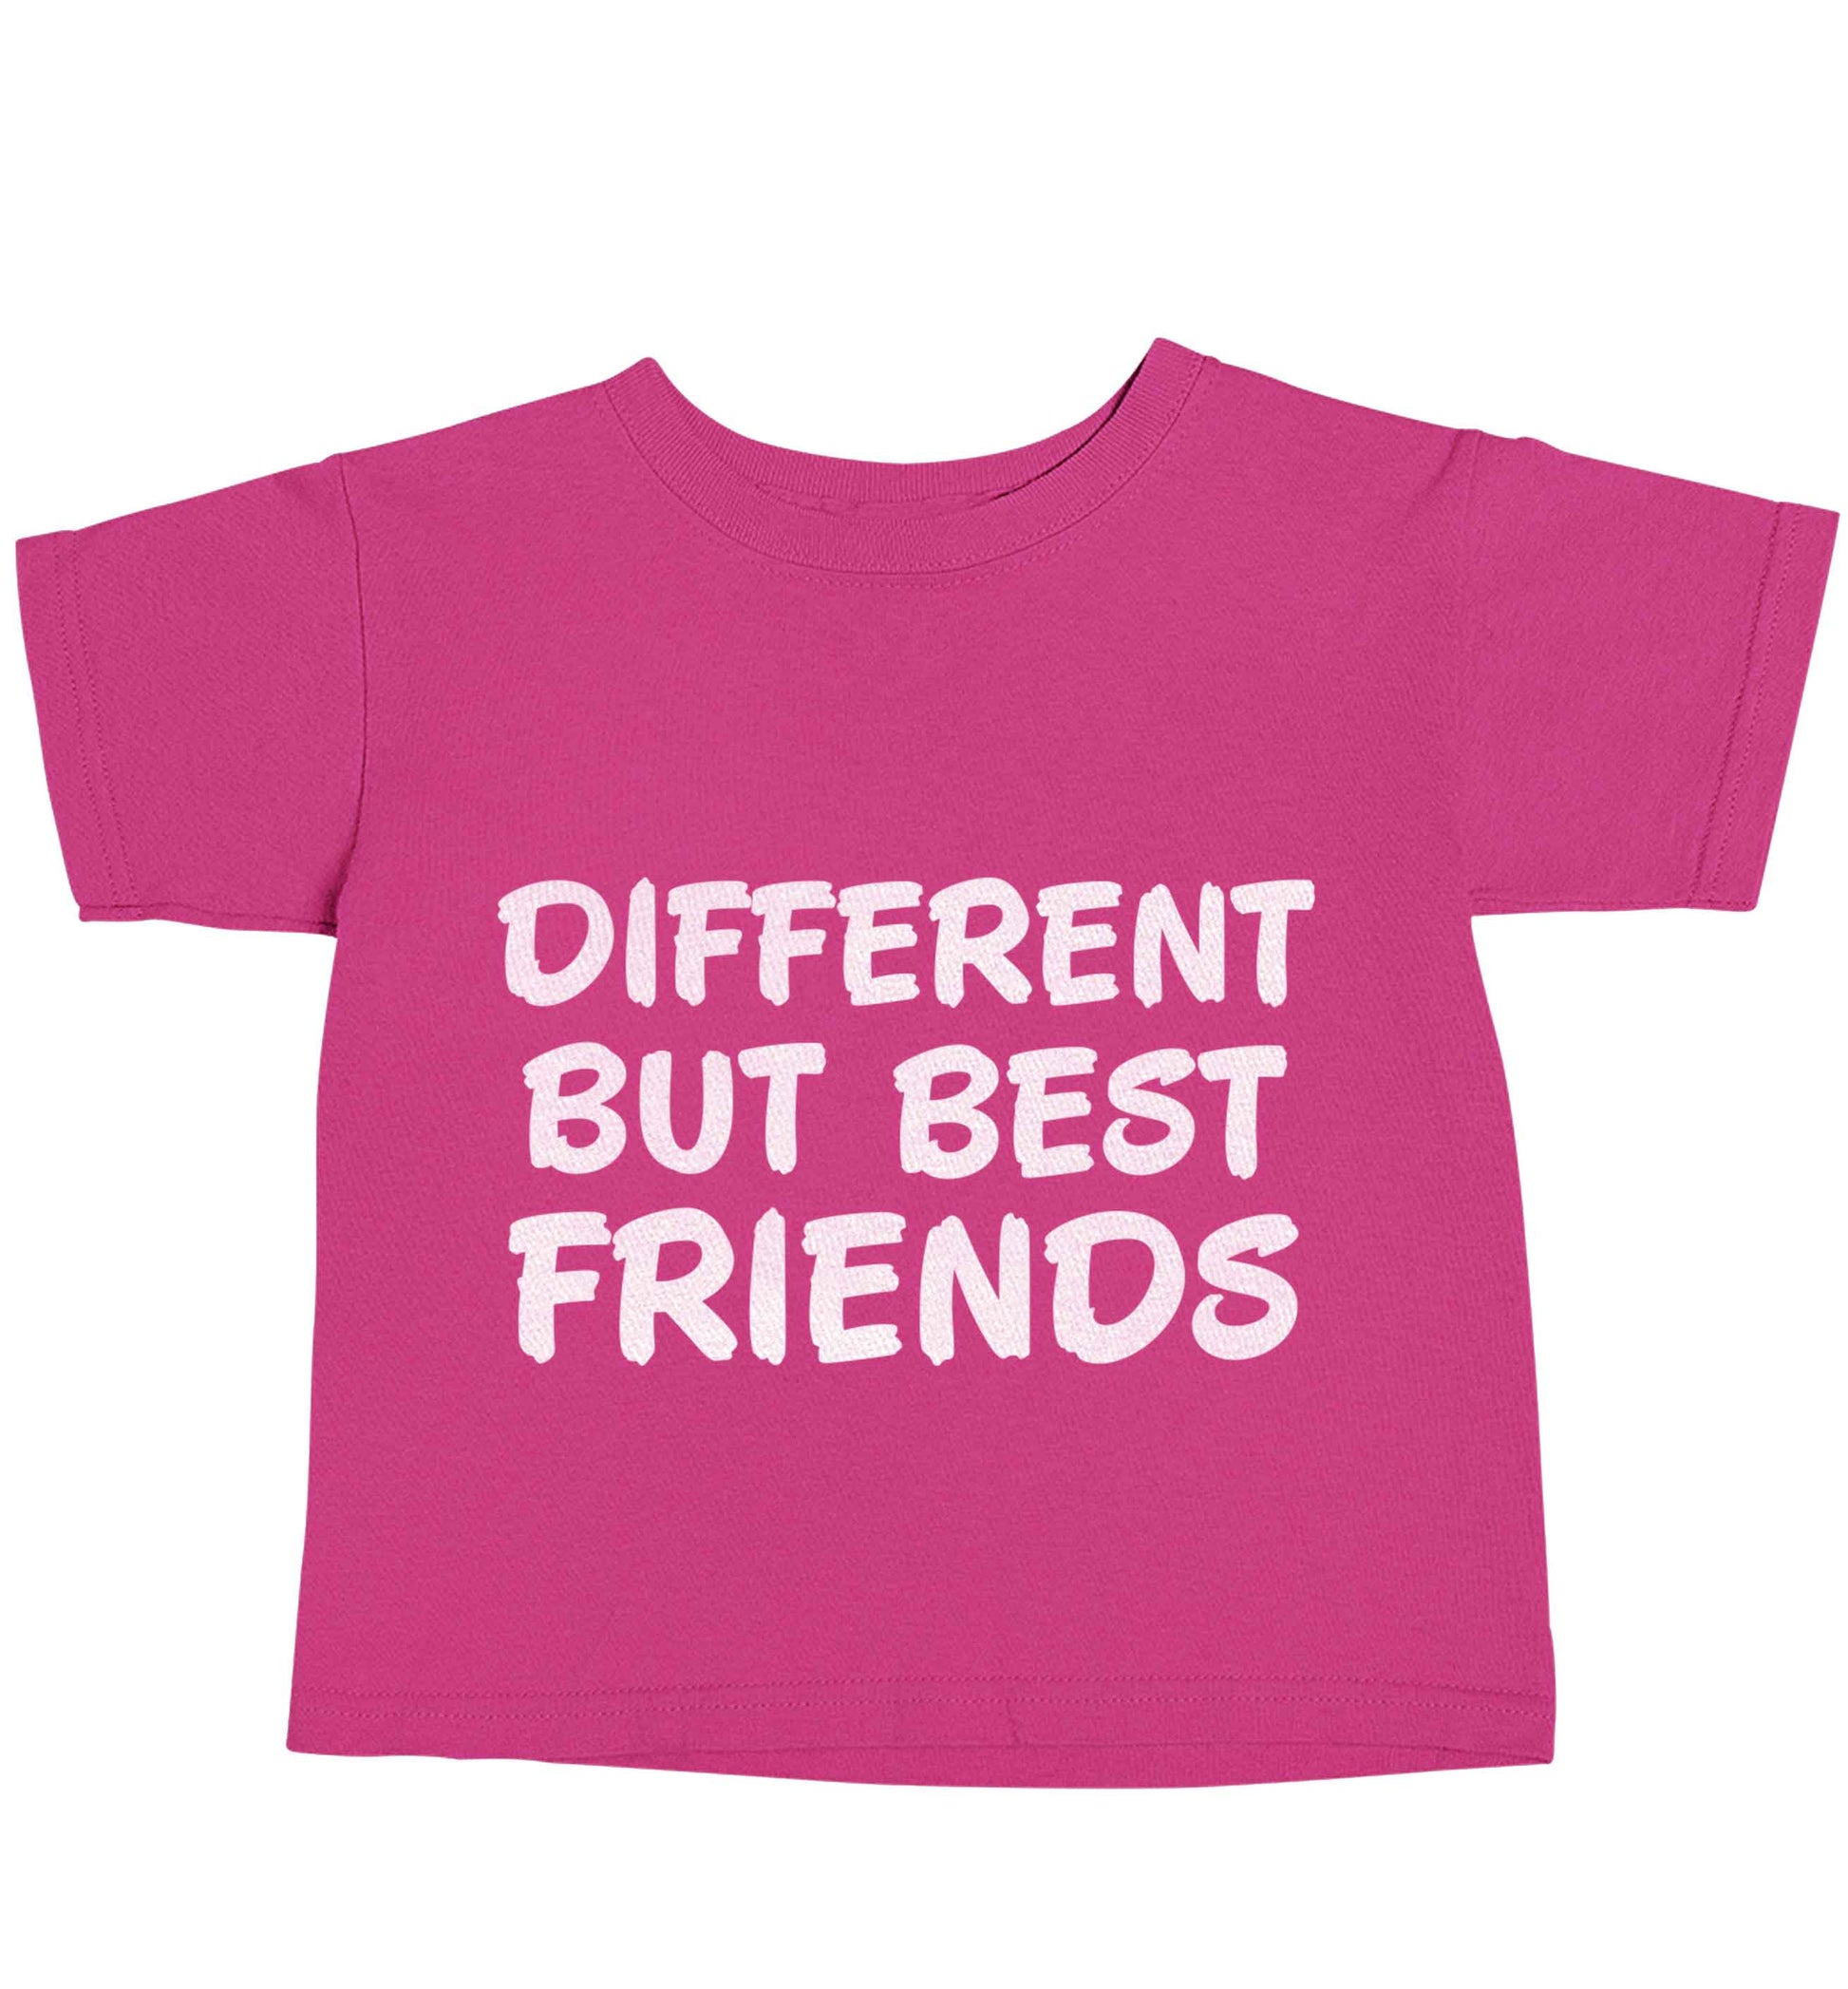 Different but best friends pink baby toddler Tshirt 2 Years